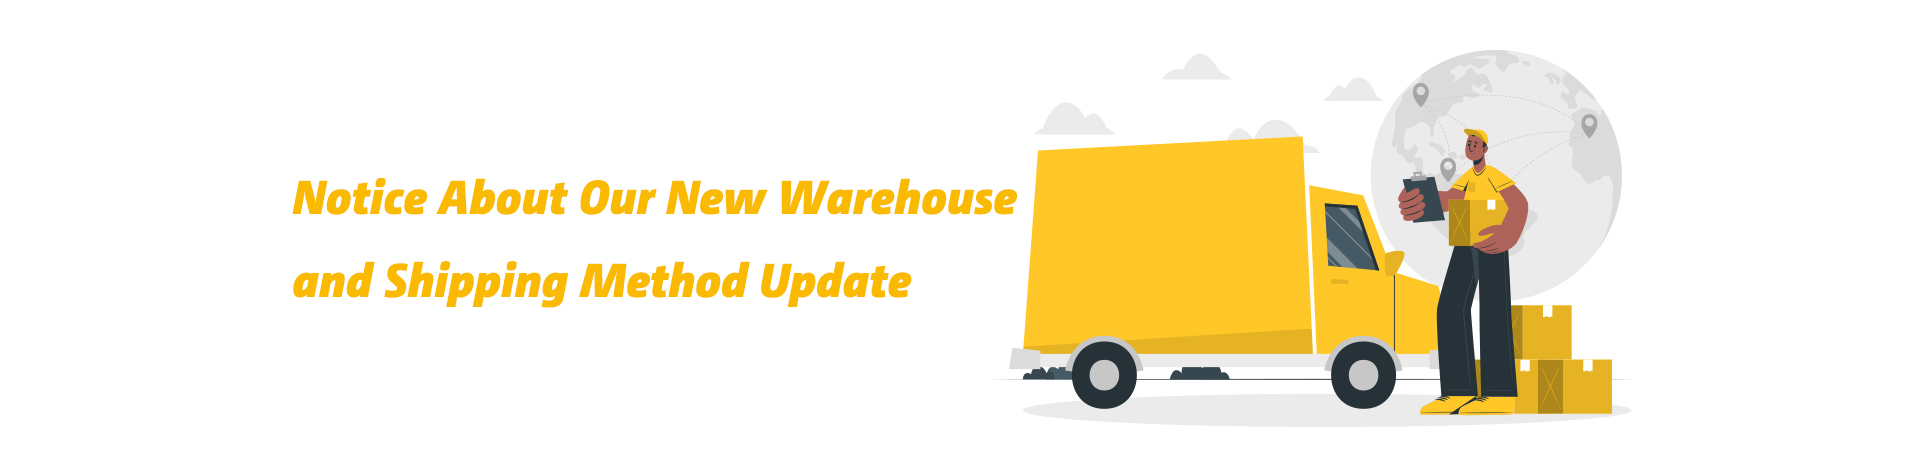 Notice About Our New Warehouse and Shipping Method Update